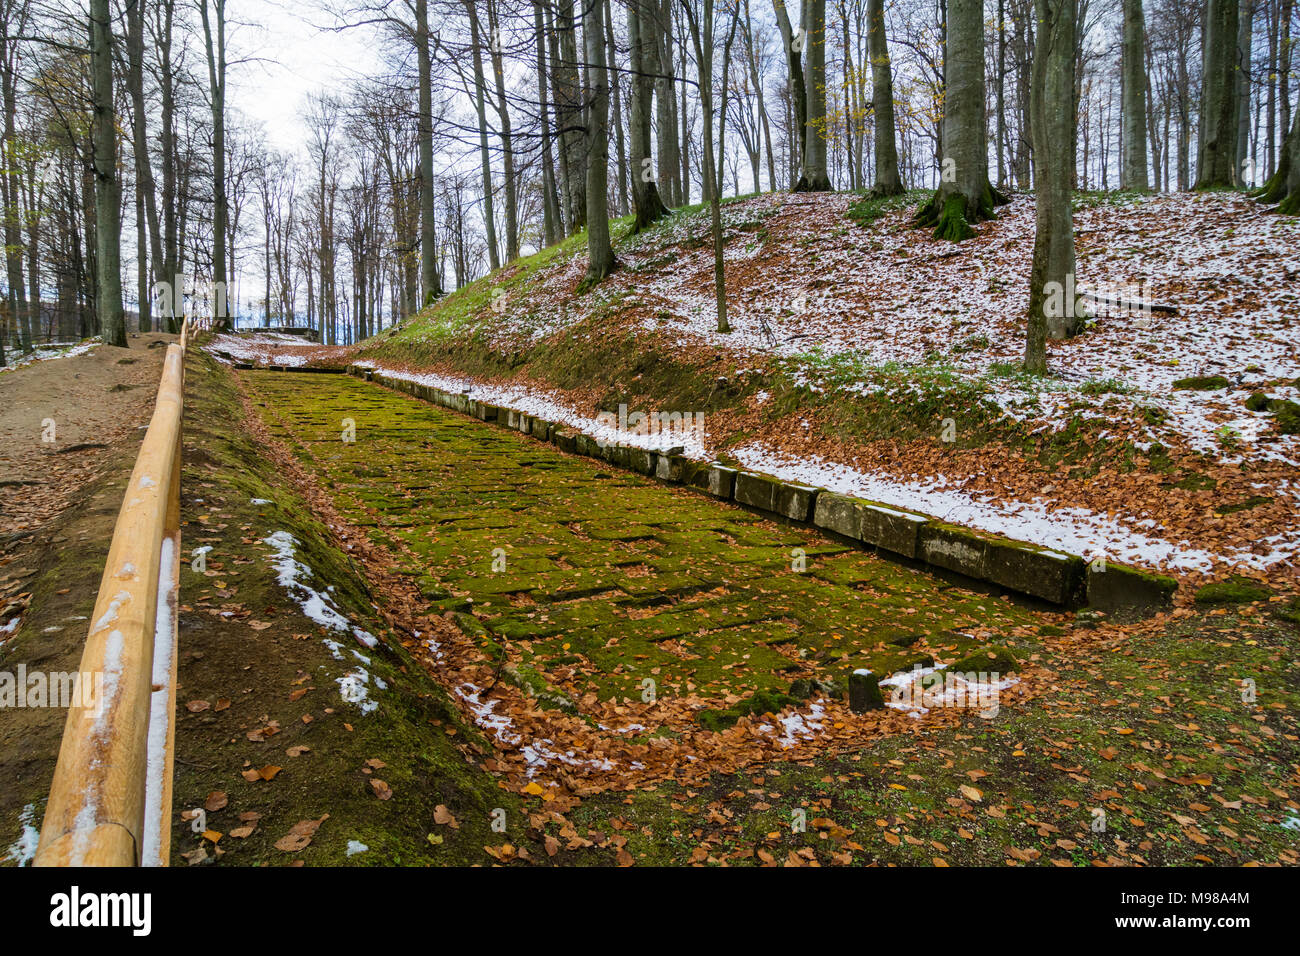 Paved ancient dacian road in Sarmizegetusa, capital of the Dacian Empire, UNESCO World Heritage Site Stock Photo